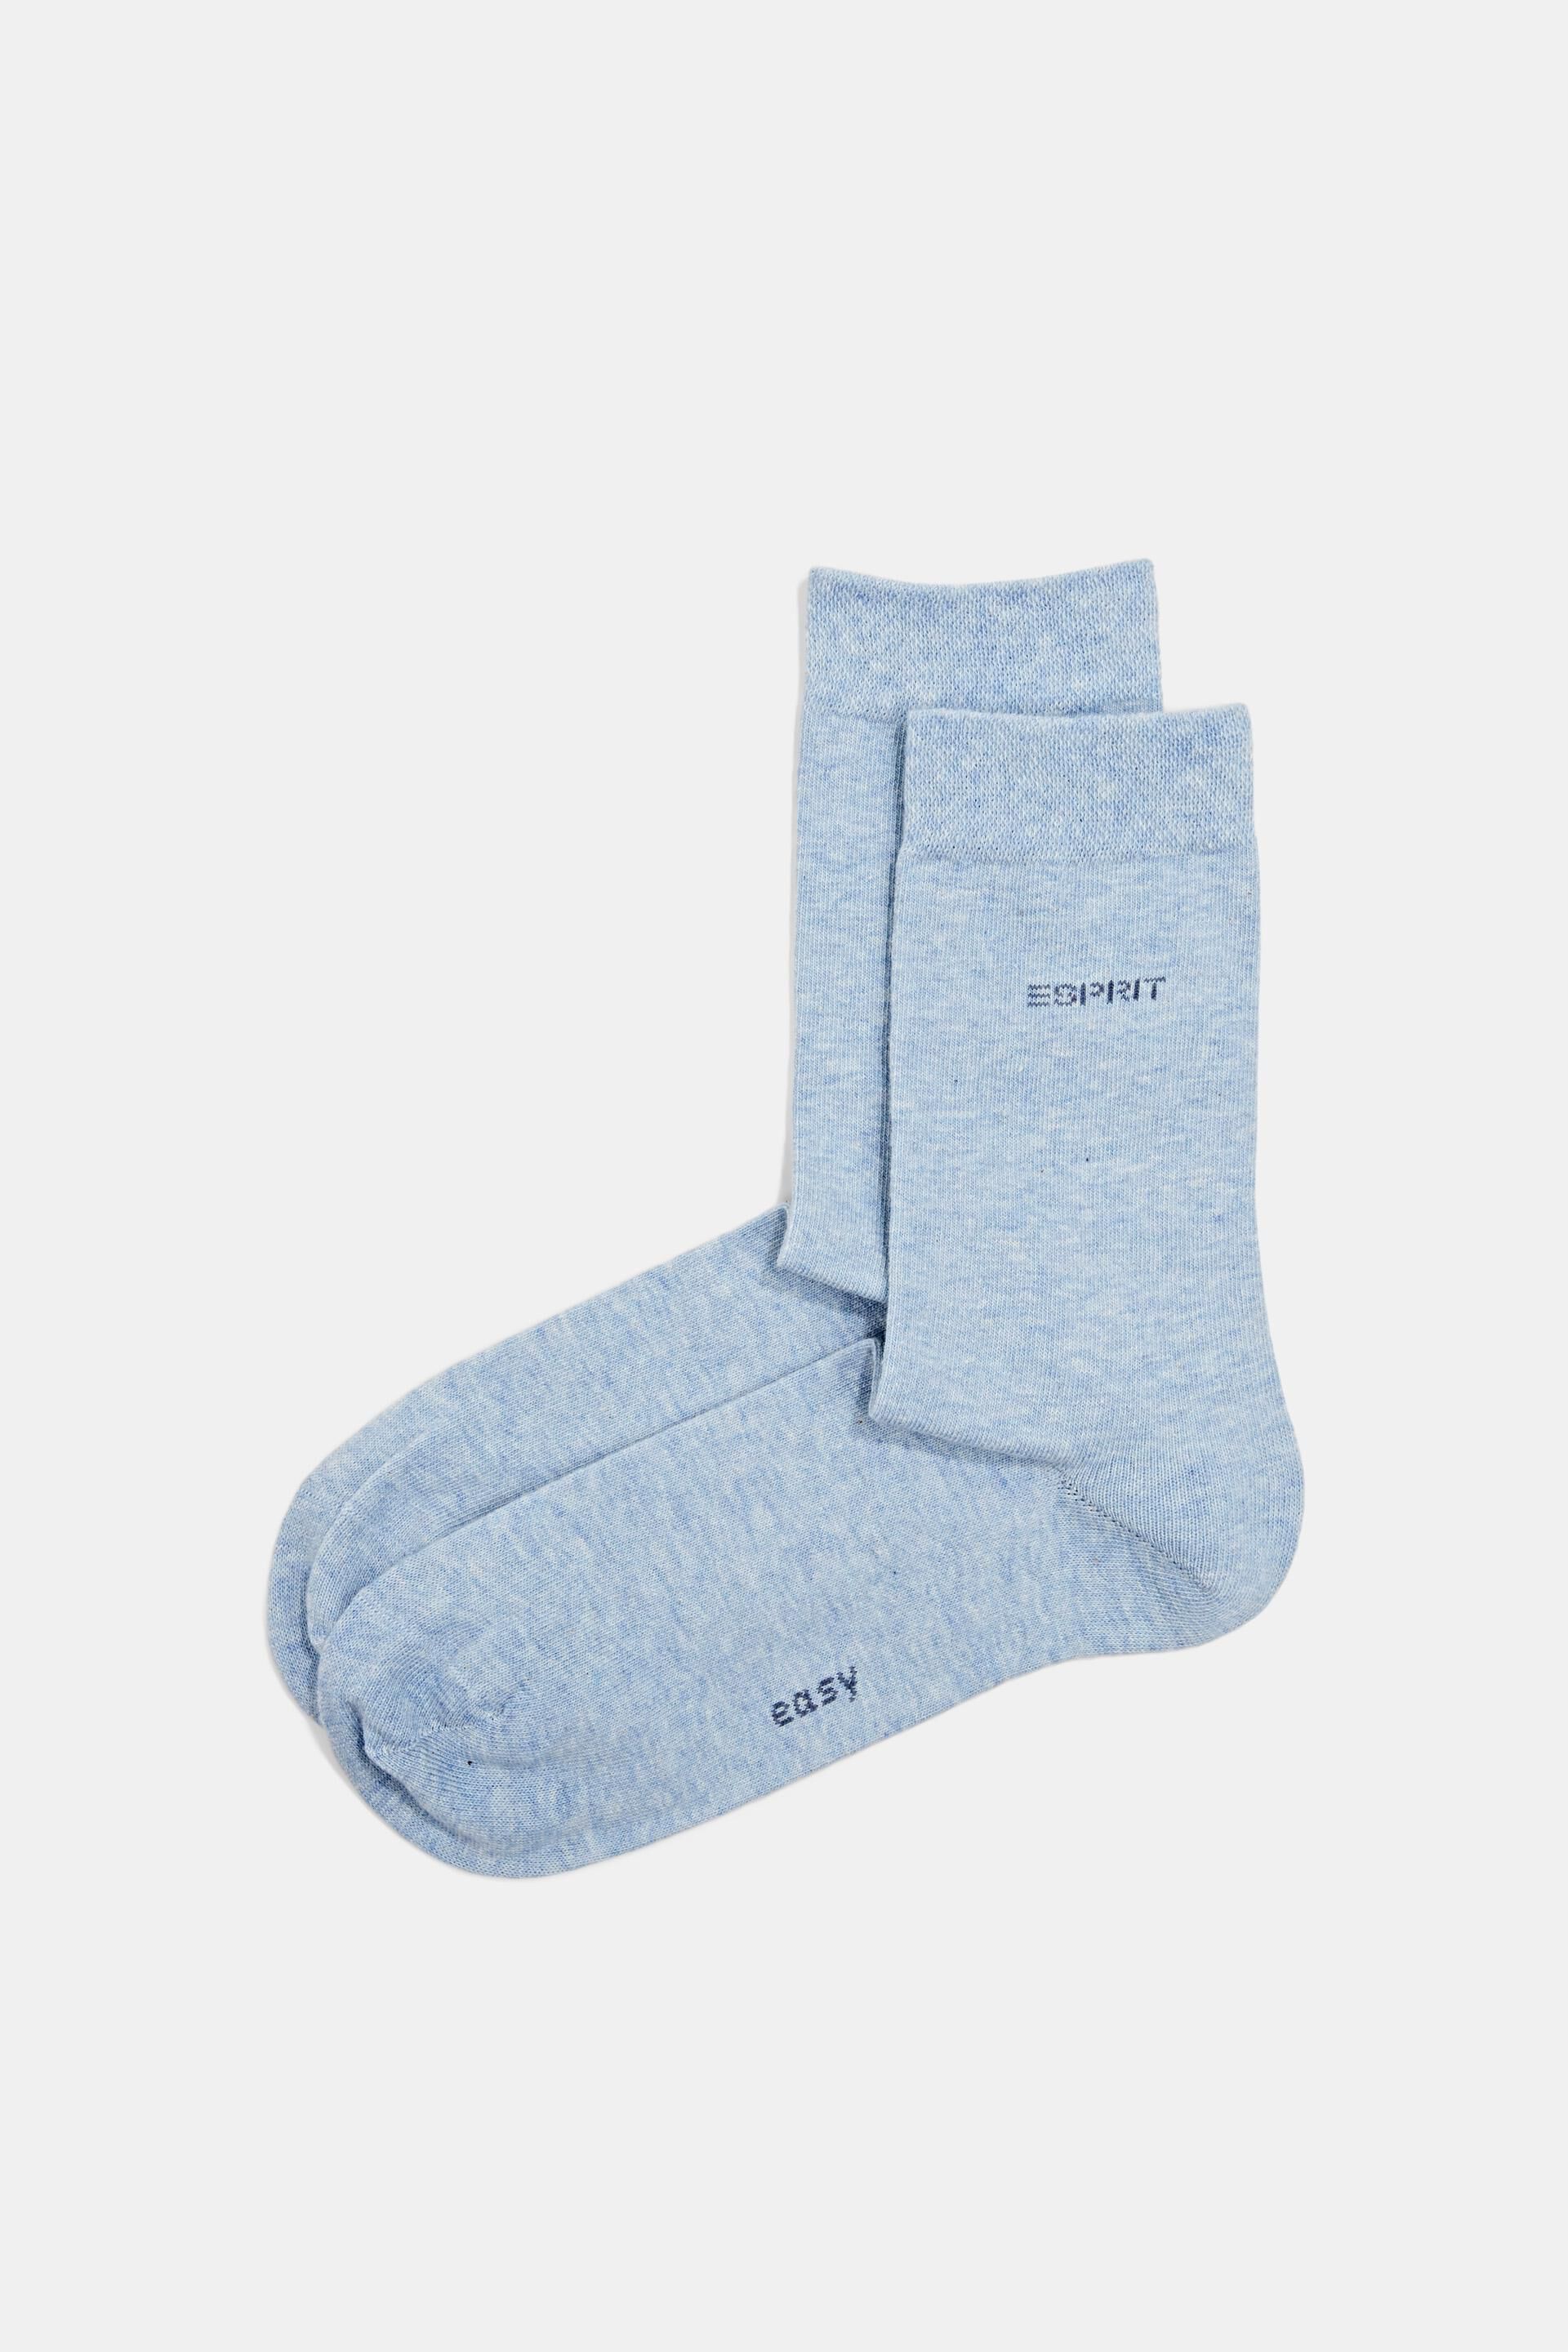 Esprit blended cotton of socks made organic Double pack